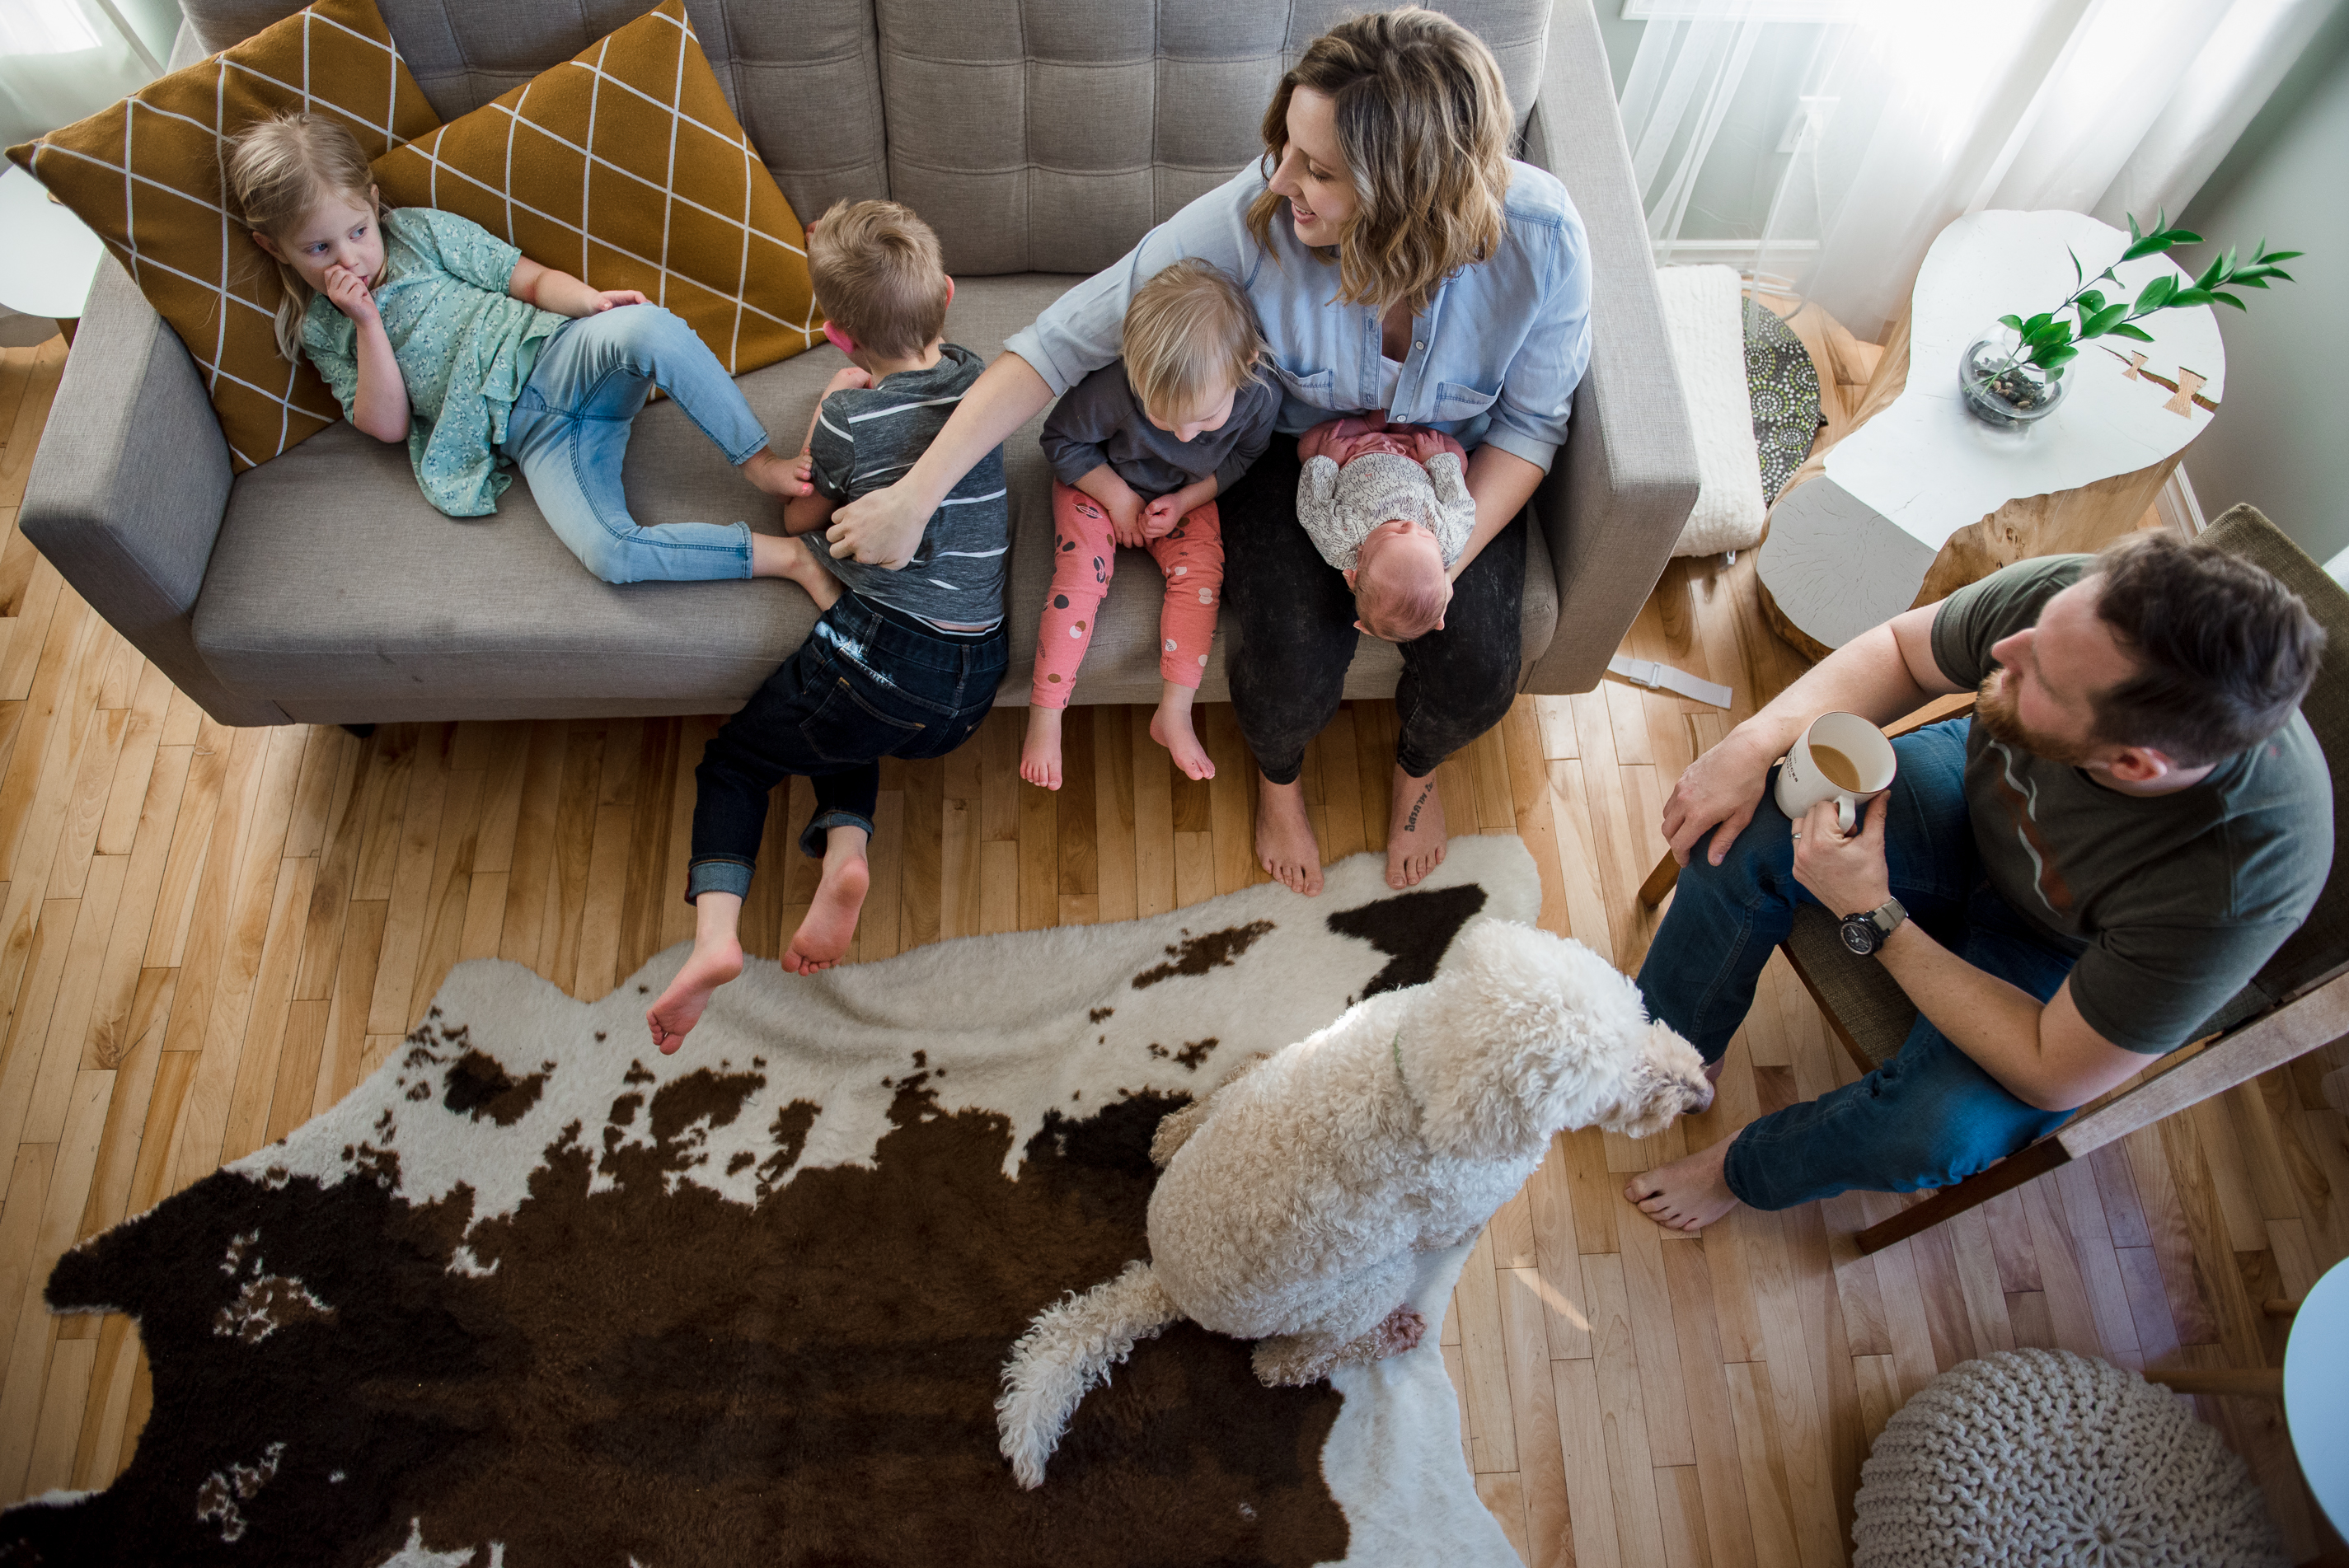 An overhead shot of a family in their living room with 3 older siblings and a new baby